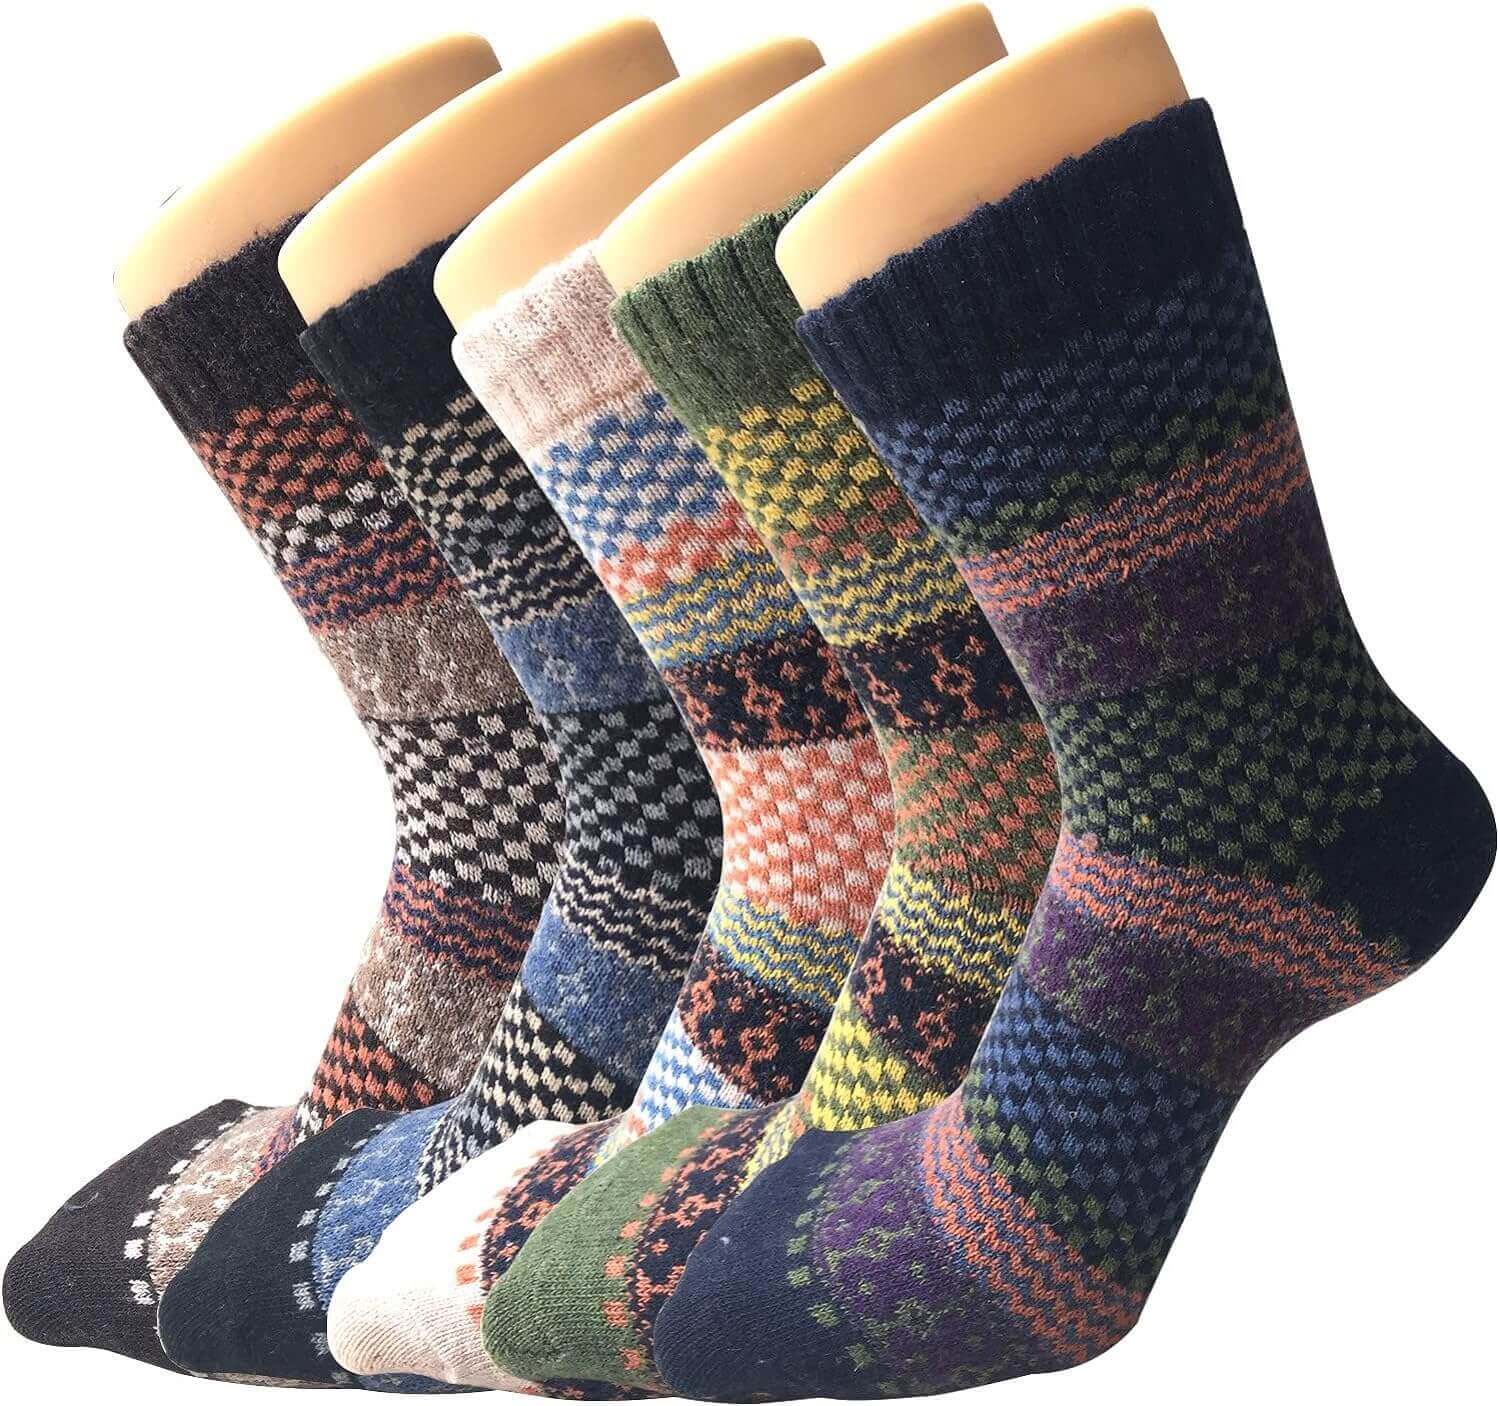 Shop The Latest >5 Pack Women's Thick Knit Wool Socks Winter Warm Socks > *Only $22.94*> From The Top Brand > *Senker Fashionl* > Shop Now and Get Free Shipping On Orders Over $45.00 >*Shop Earth Foot*